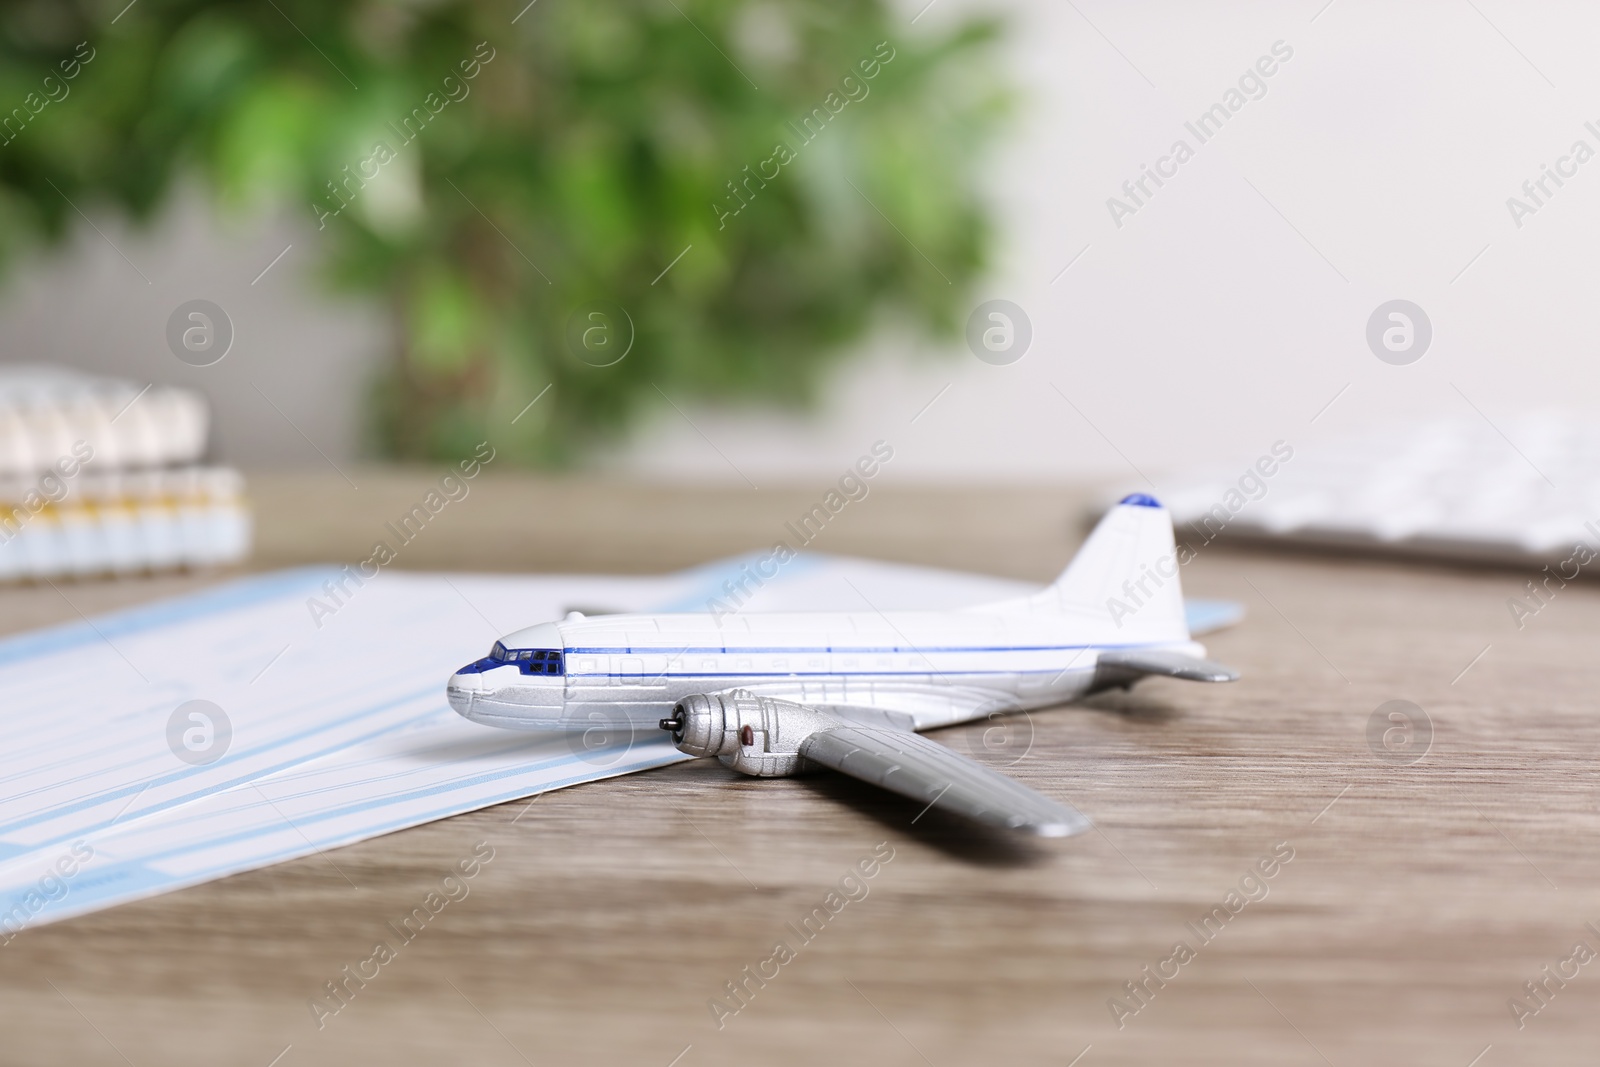 Photo of Plane model on wooden table indoors. Travel agency